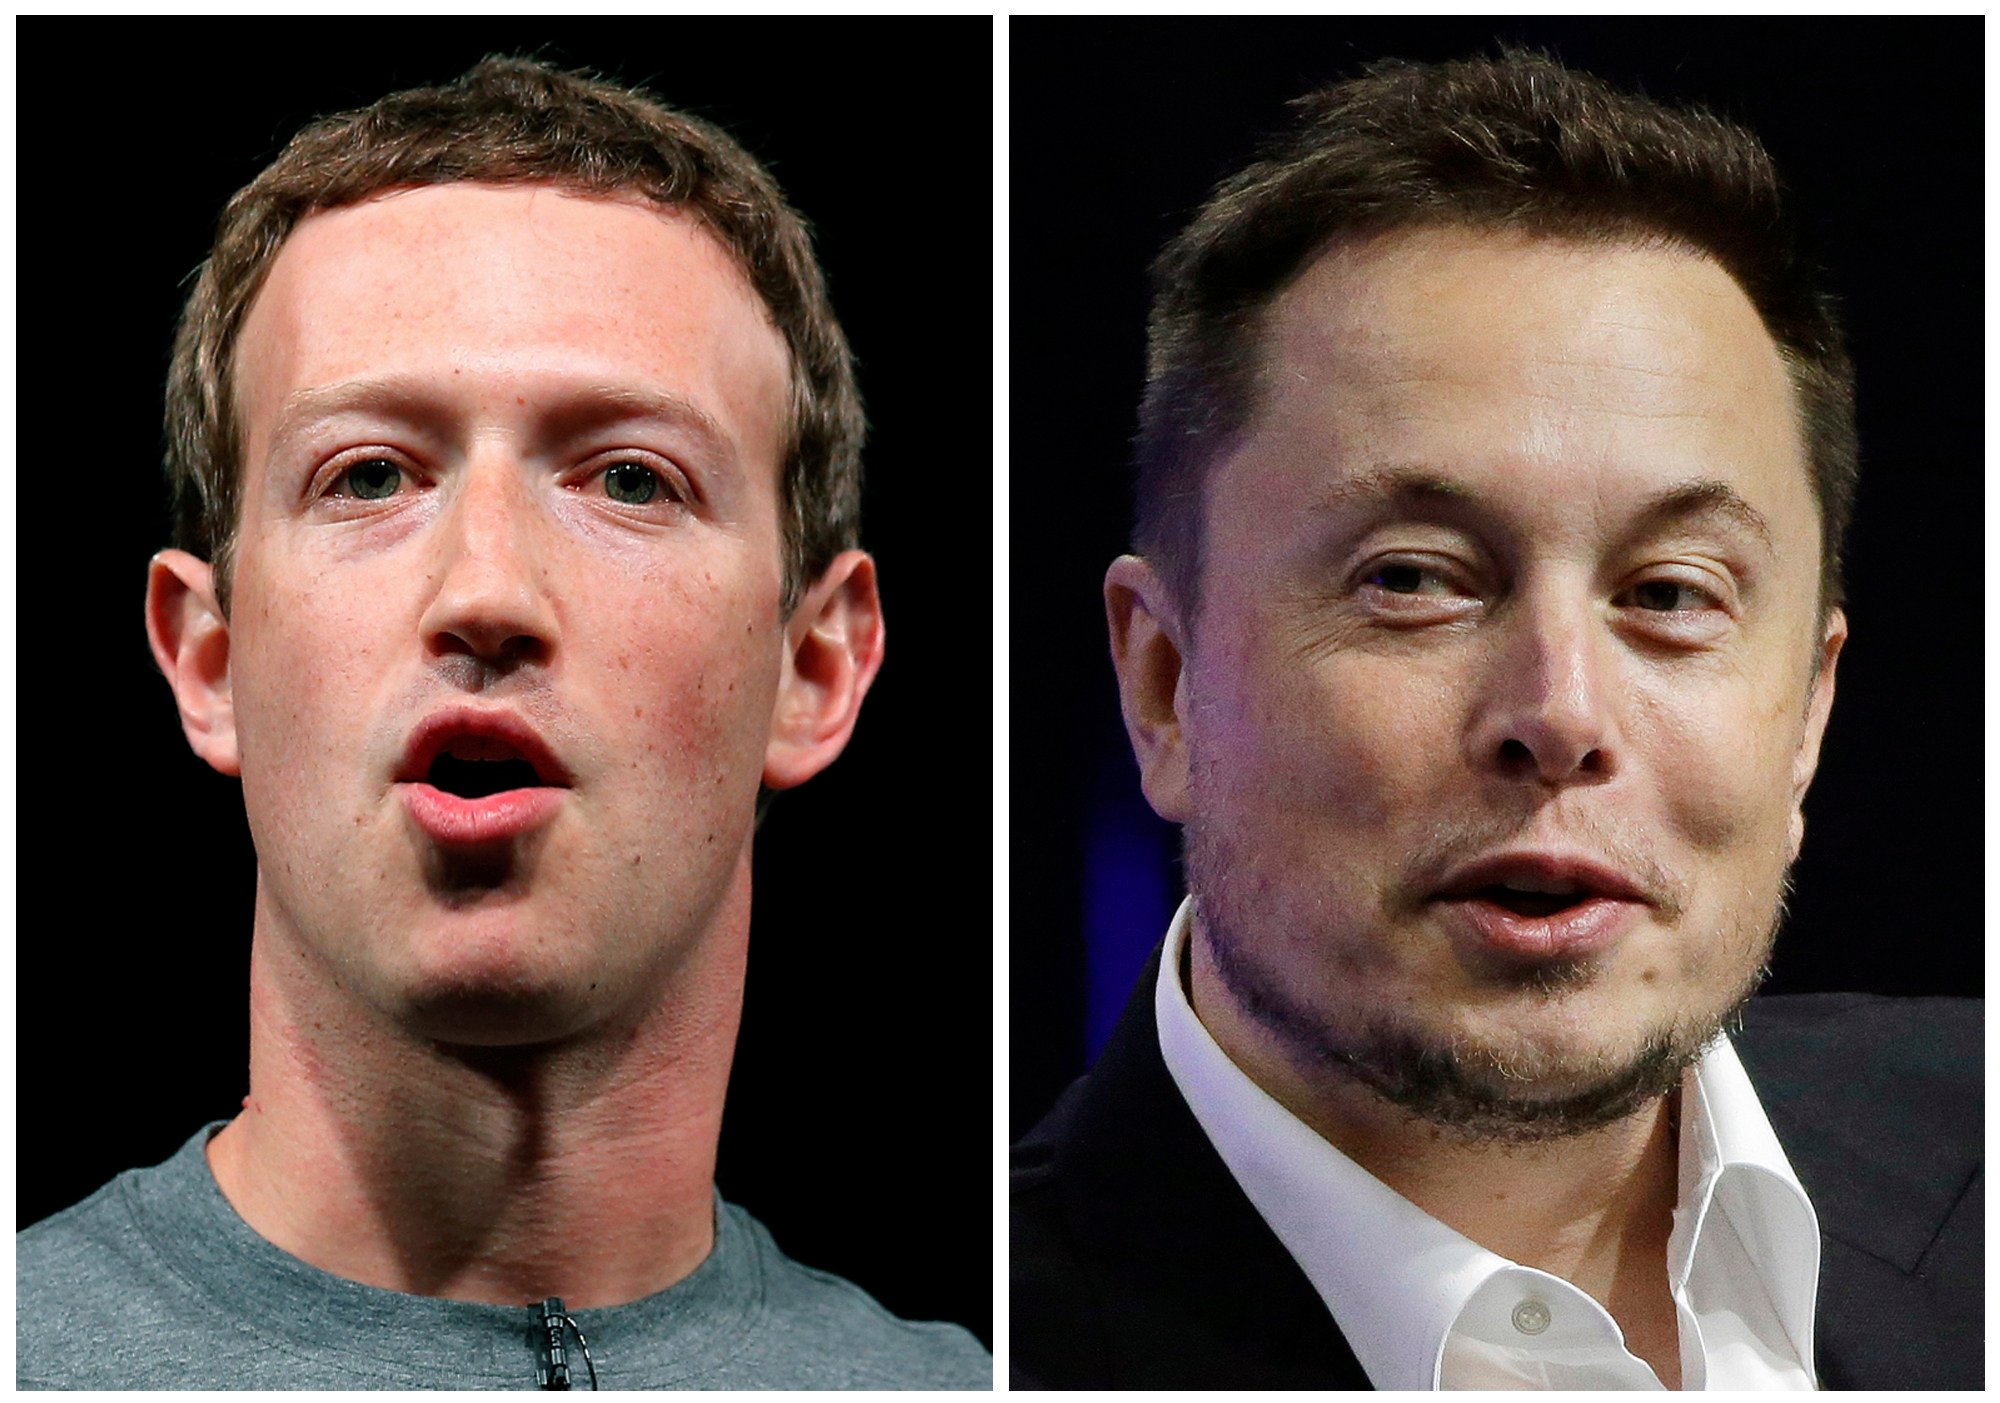 Mark Zuckerberg is seeing his reputation spruced up thanks to the increasingly unpredictable behaviour of Elon Musk. Photo: AP